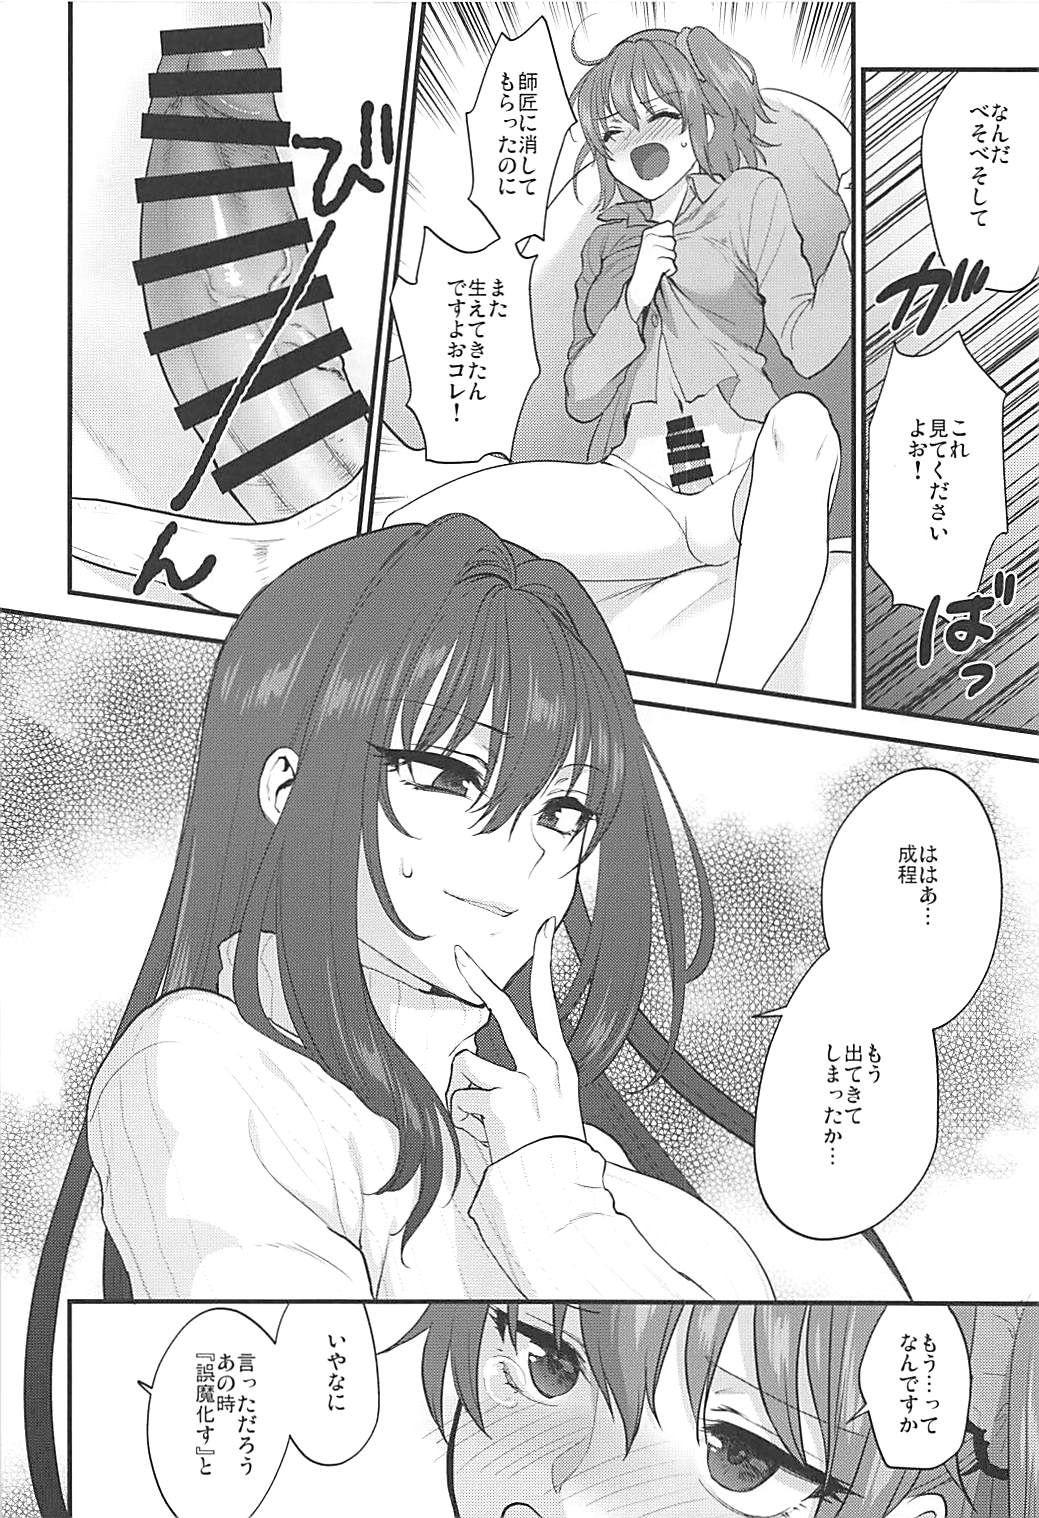 Thick In my room. - Fate grand order Stripper - Page 5